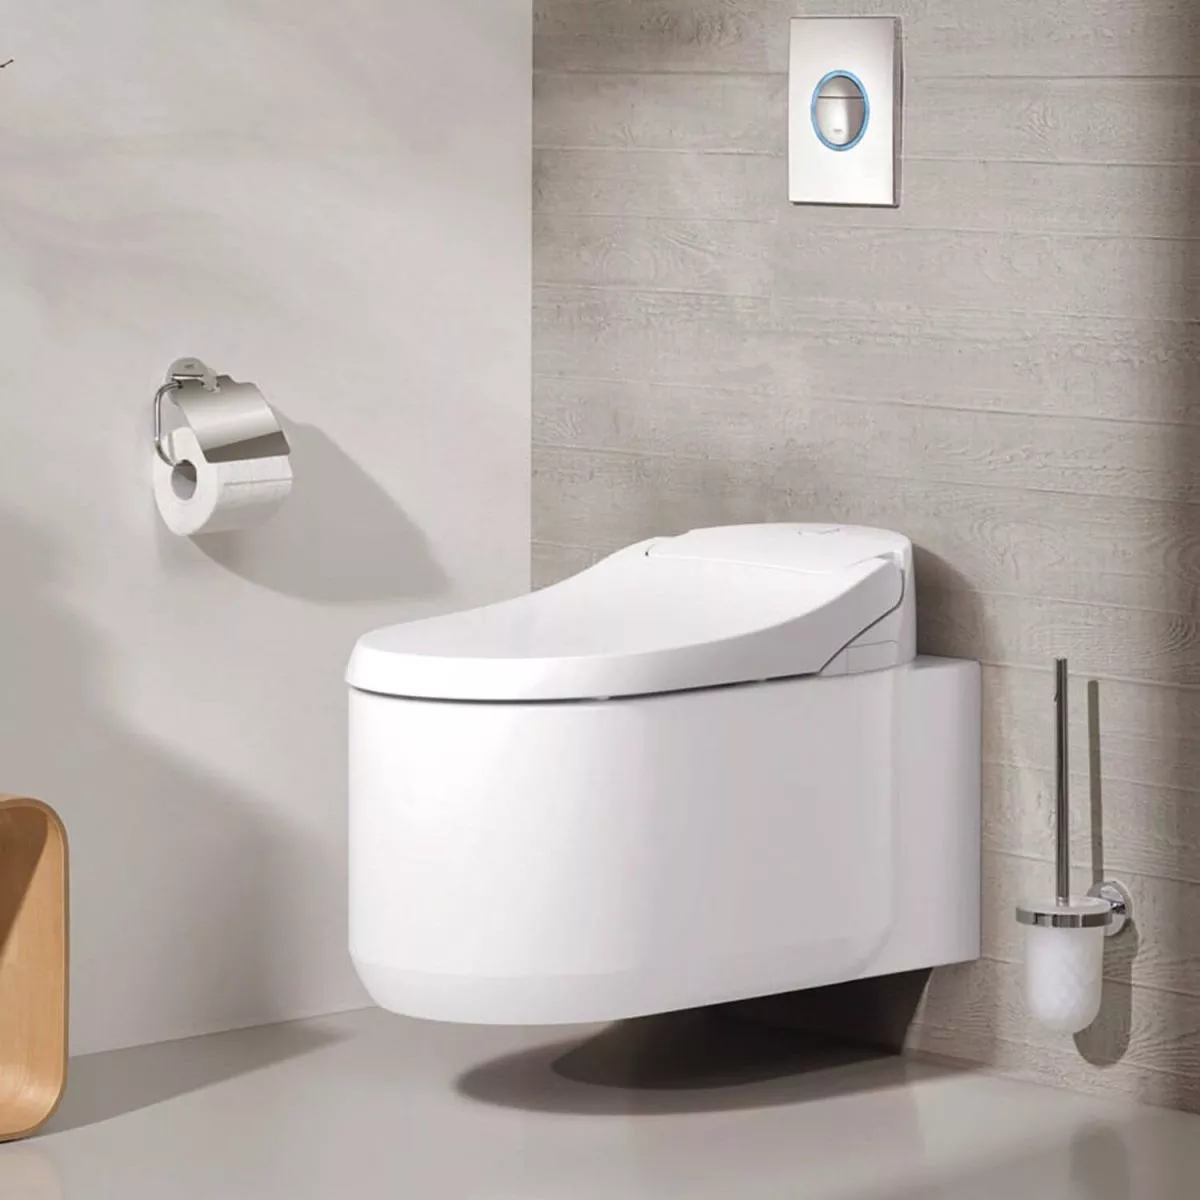 Smart Toilets: Instant Heating vs. Thermal Storage